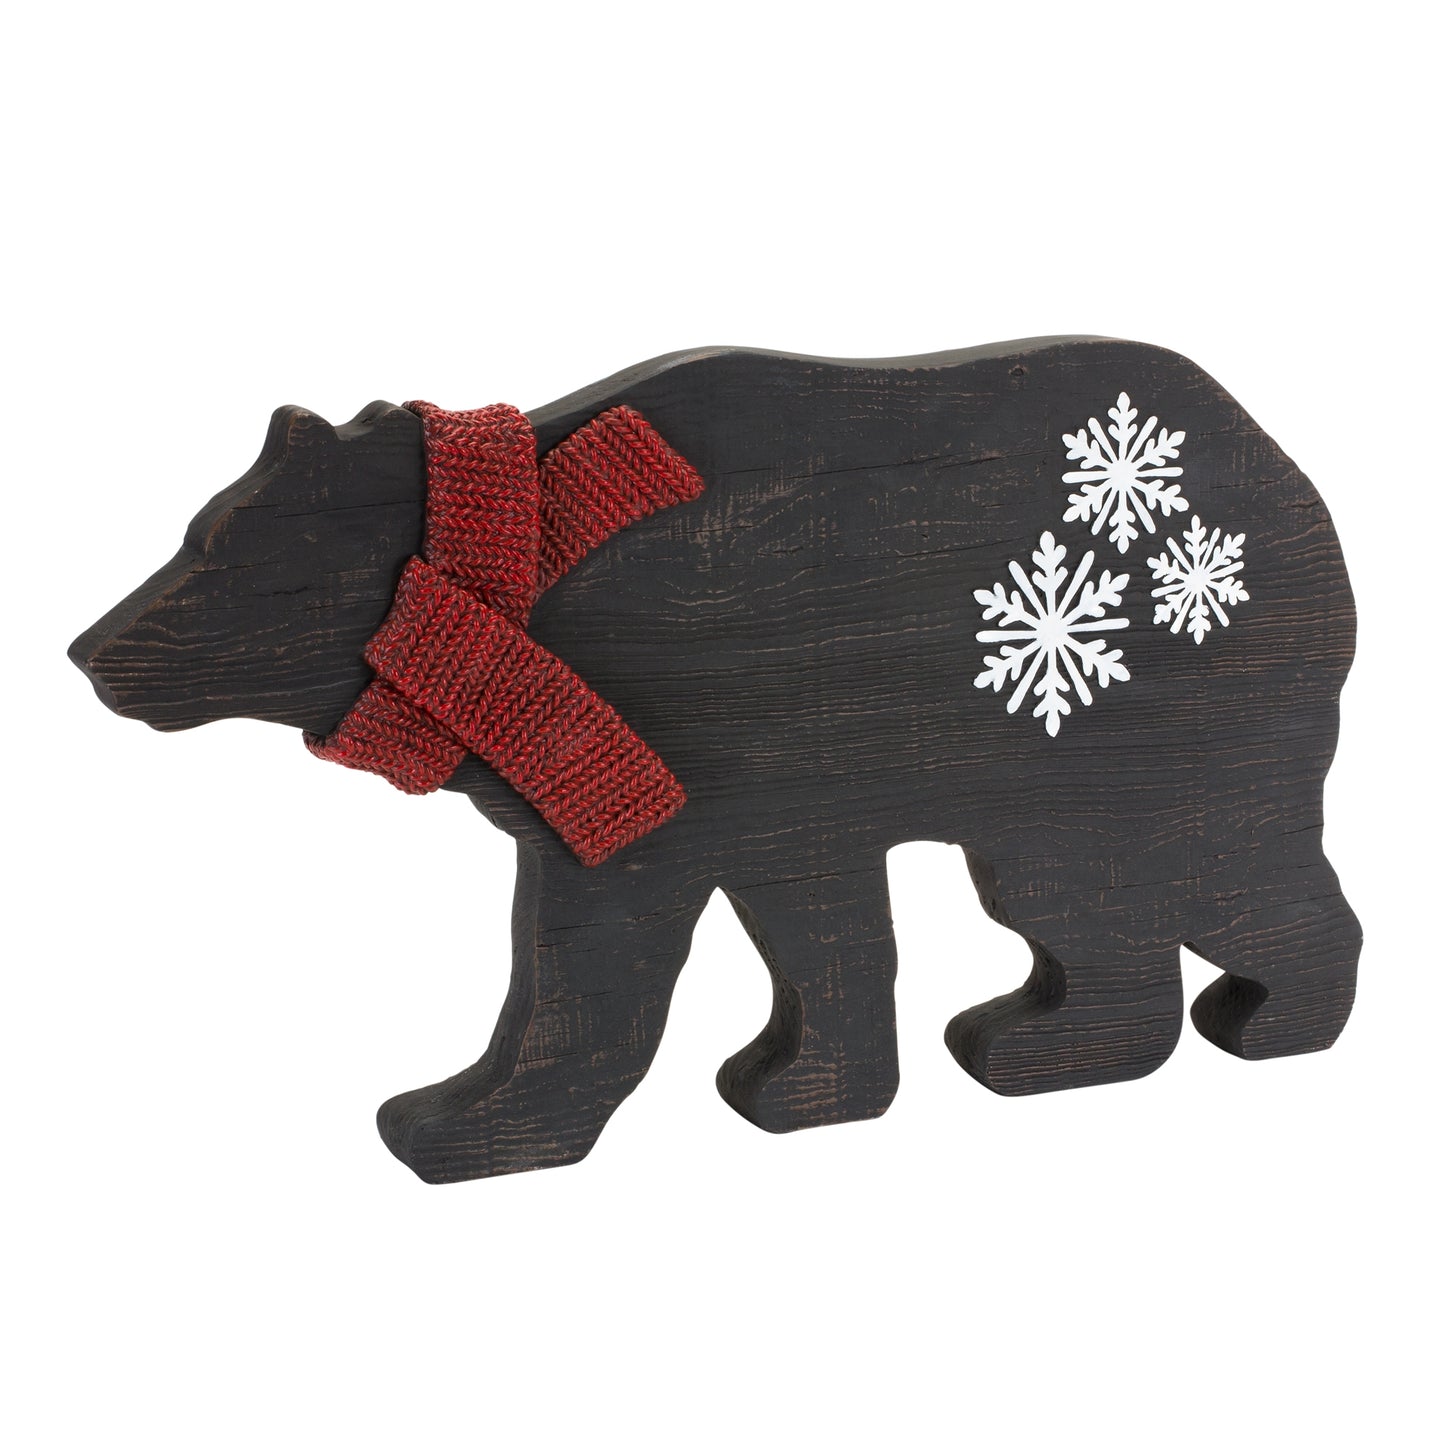 Black Bear Outline with Snowflake and Scarf Accent 18.75"L